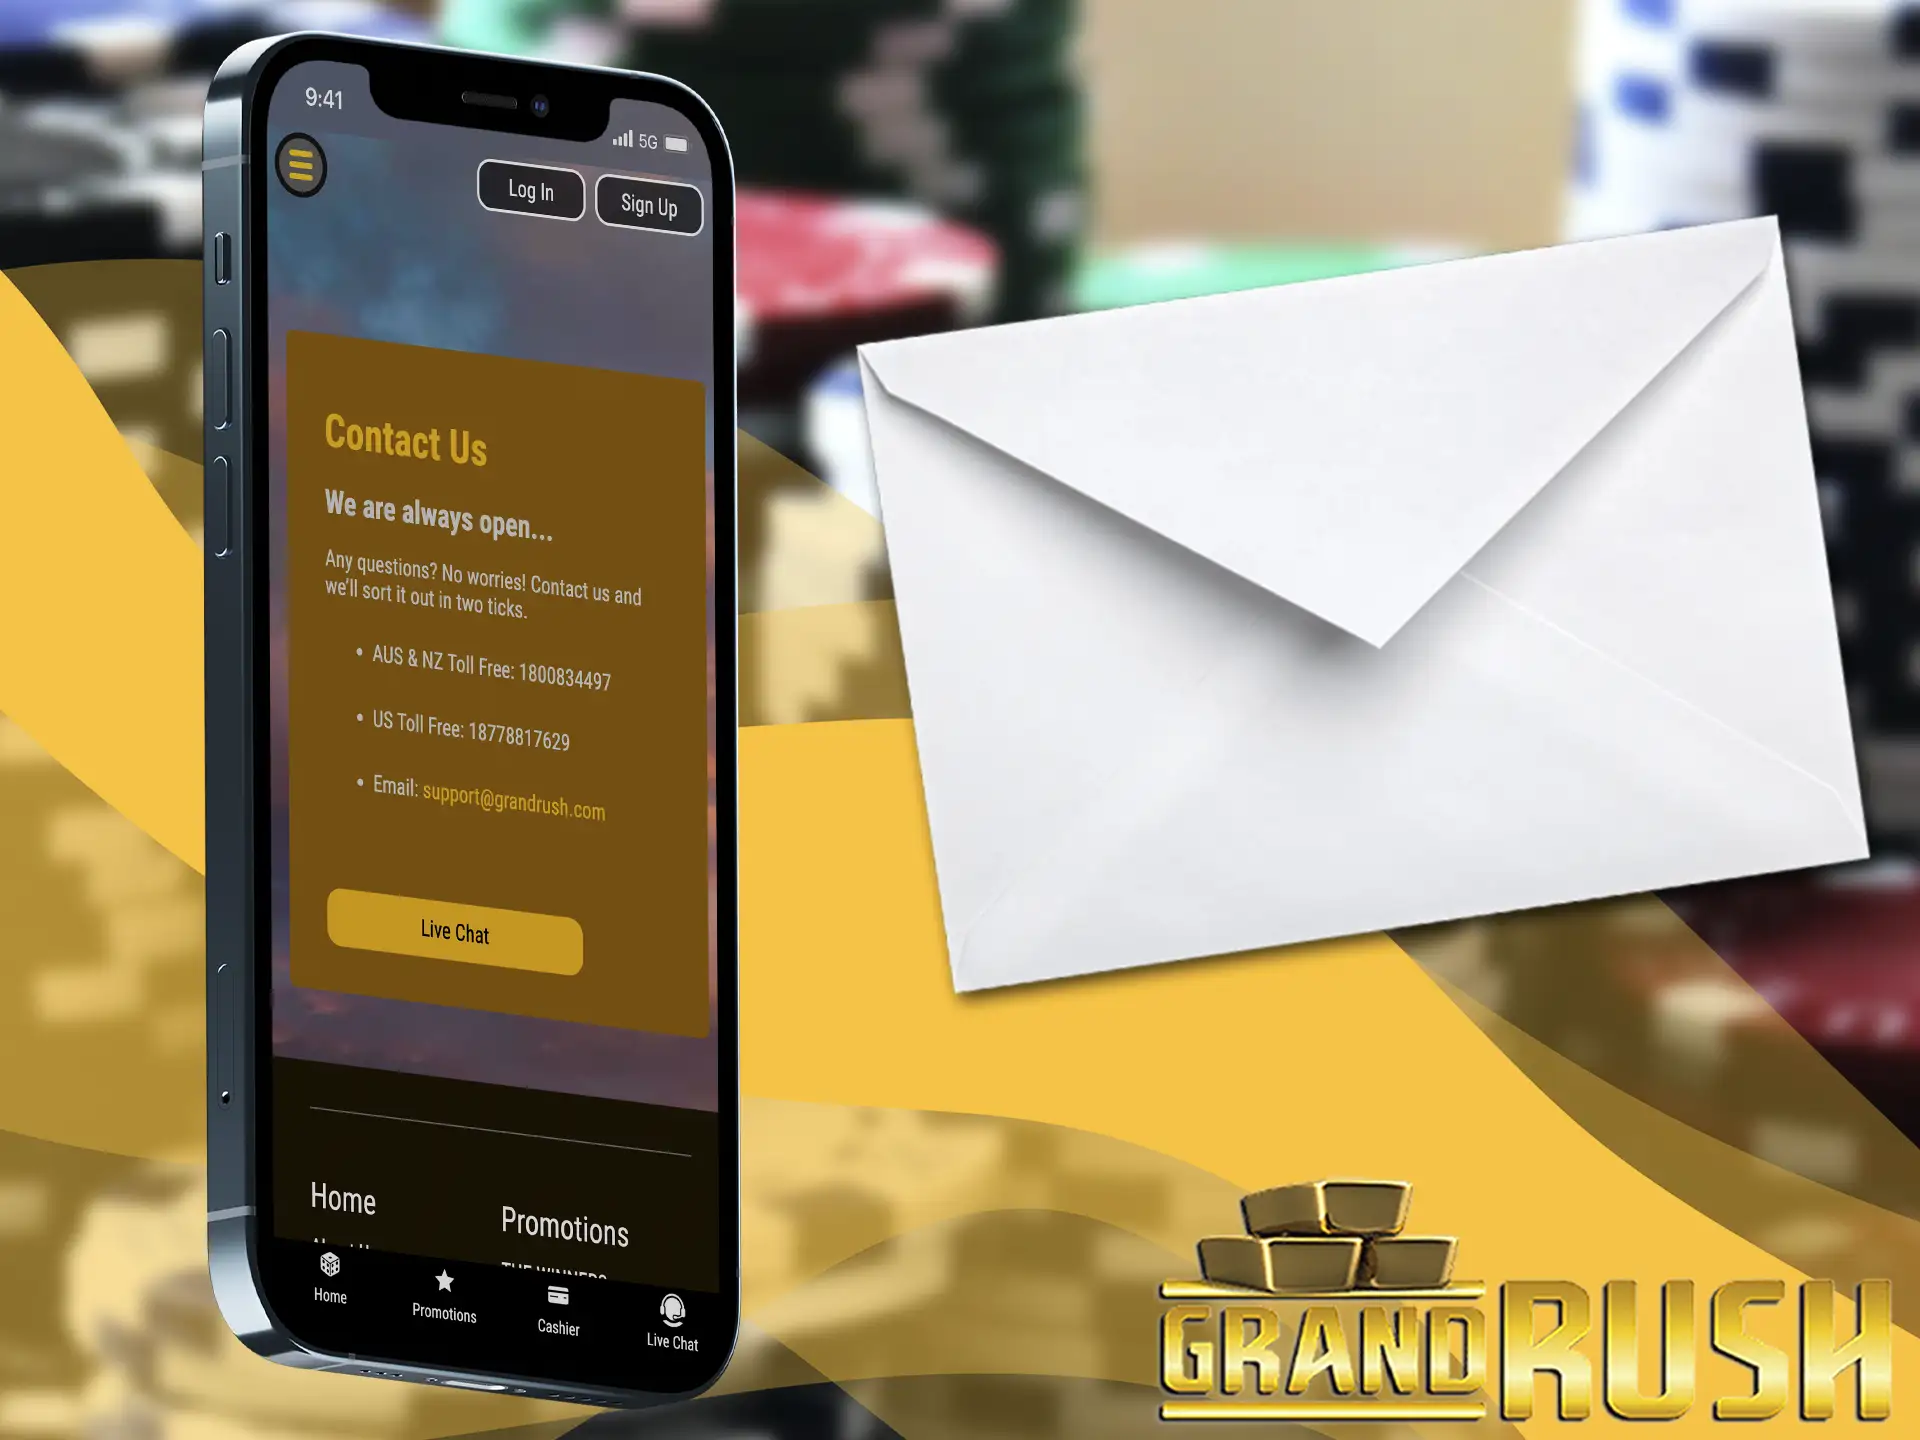 You can contact the experts at Grand Rush Casino using regular email.